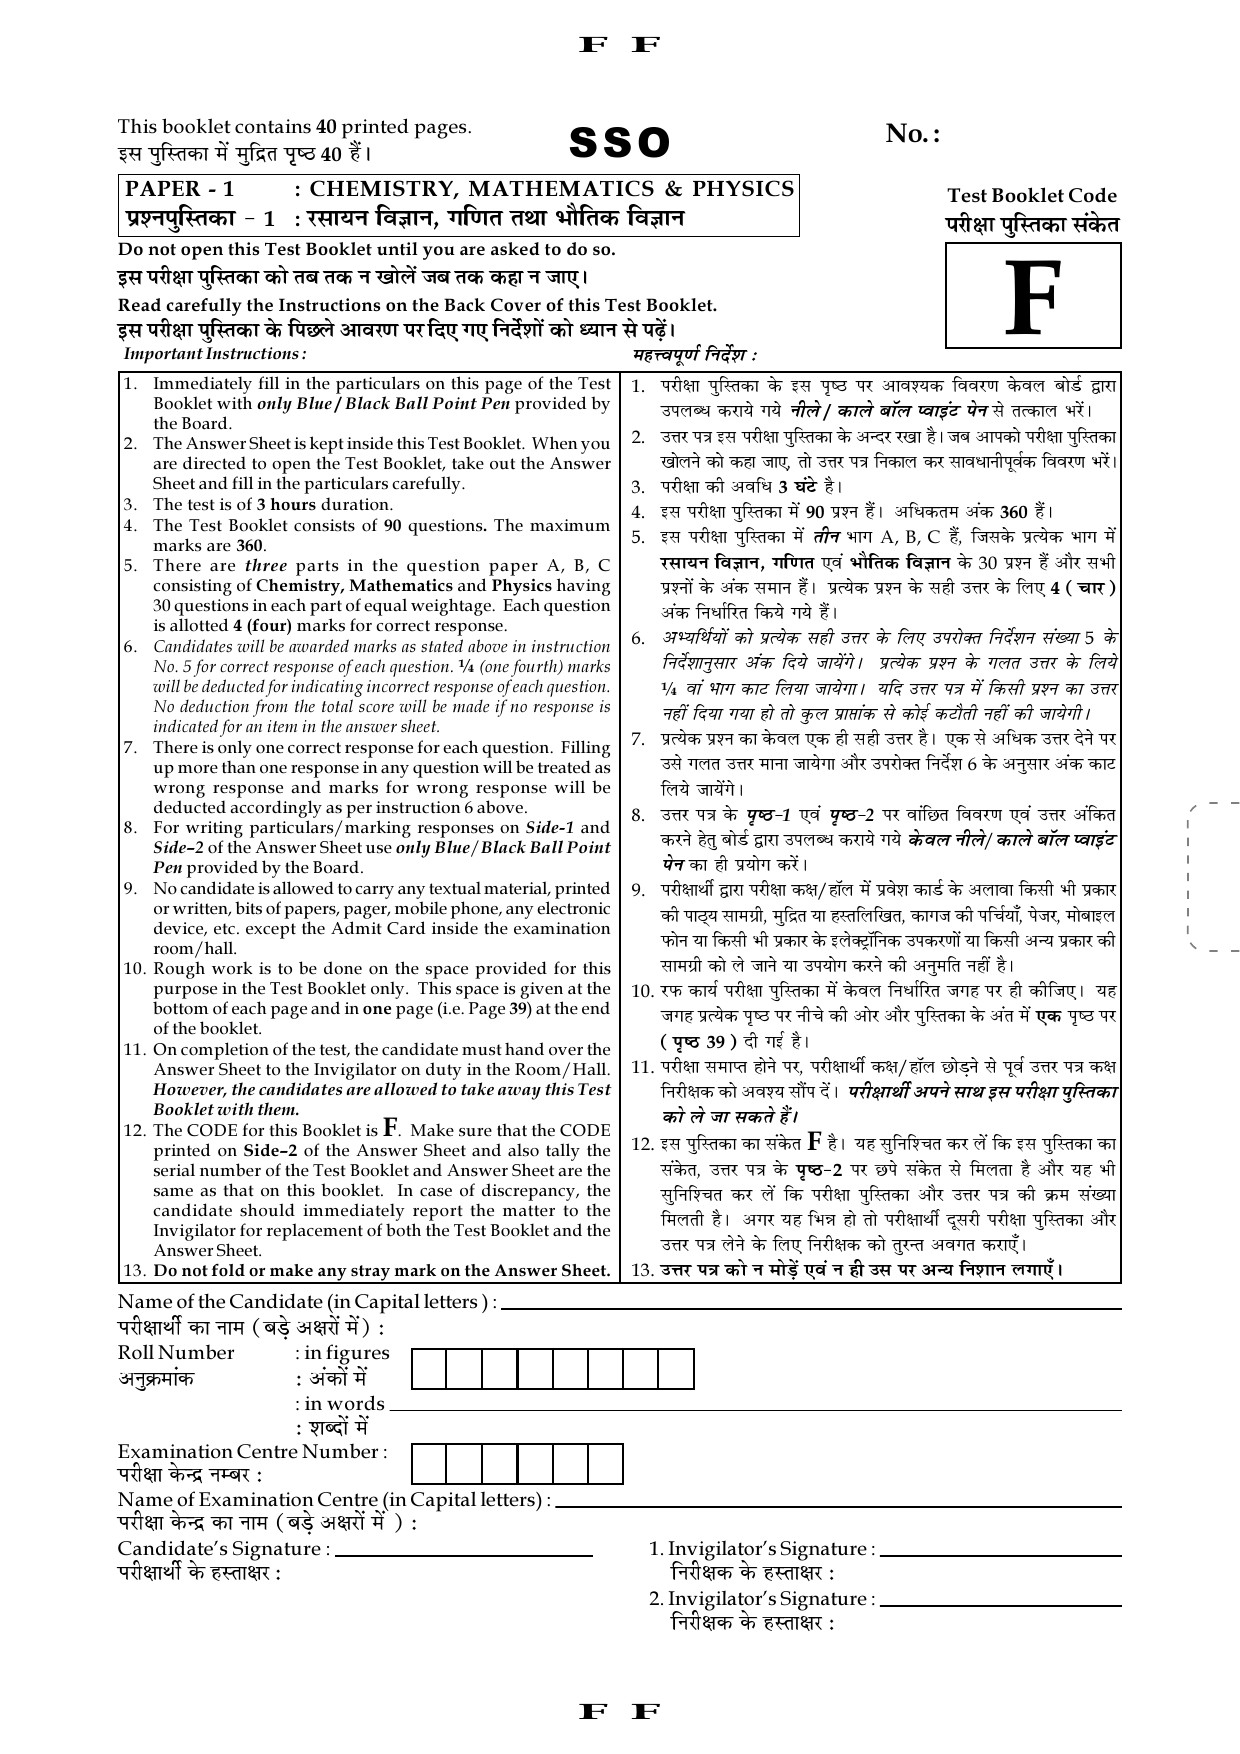 JEE Main Exam Question Paper 2016 Booklet F 1